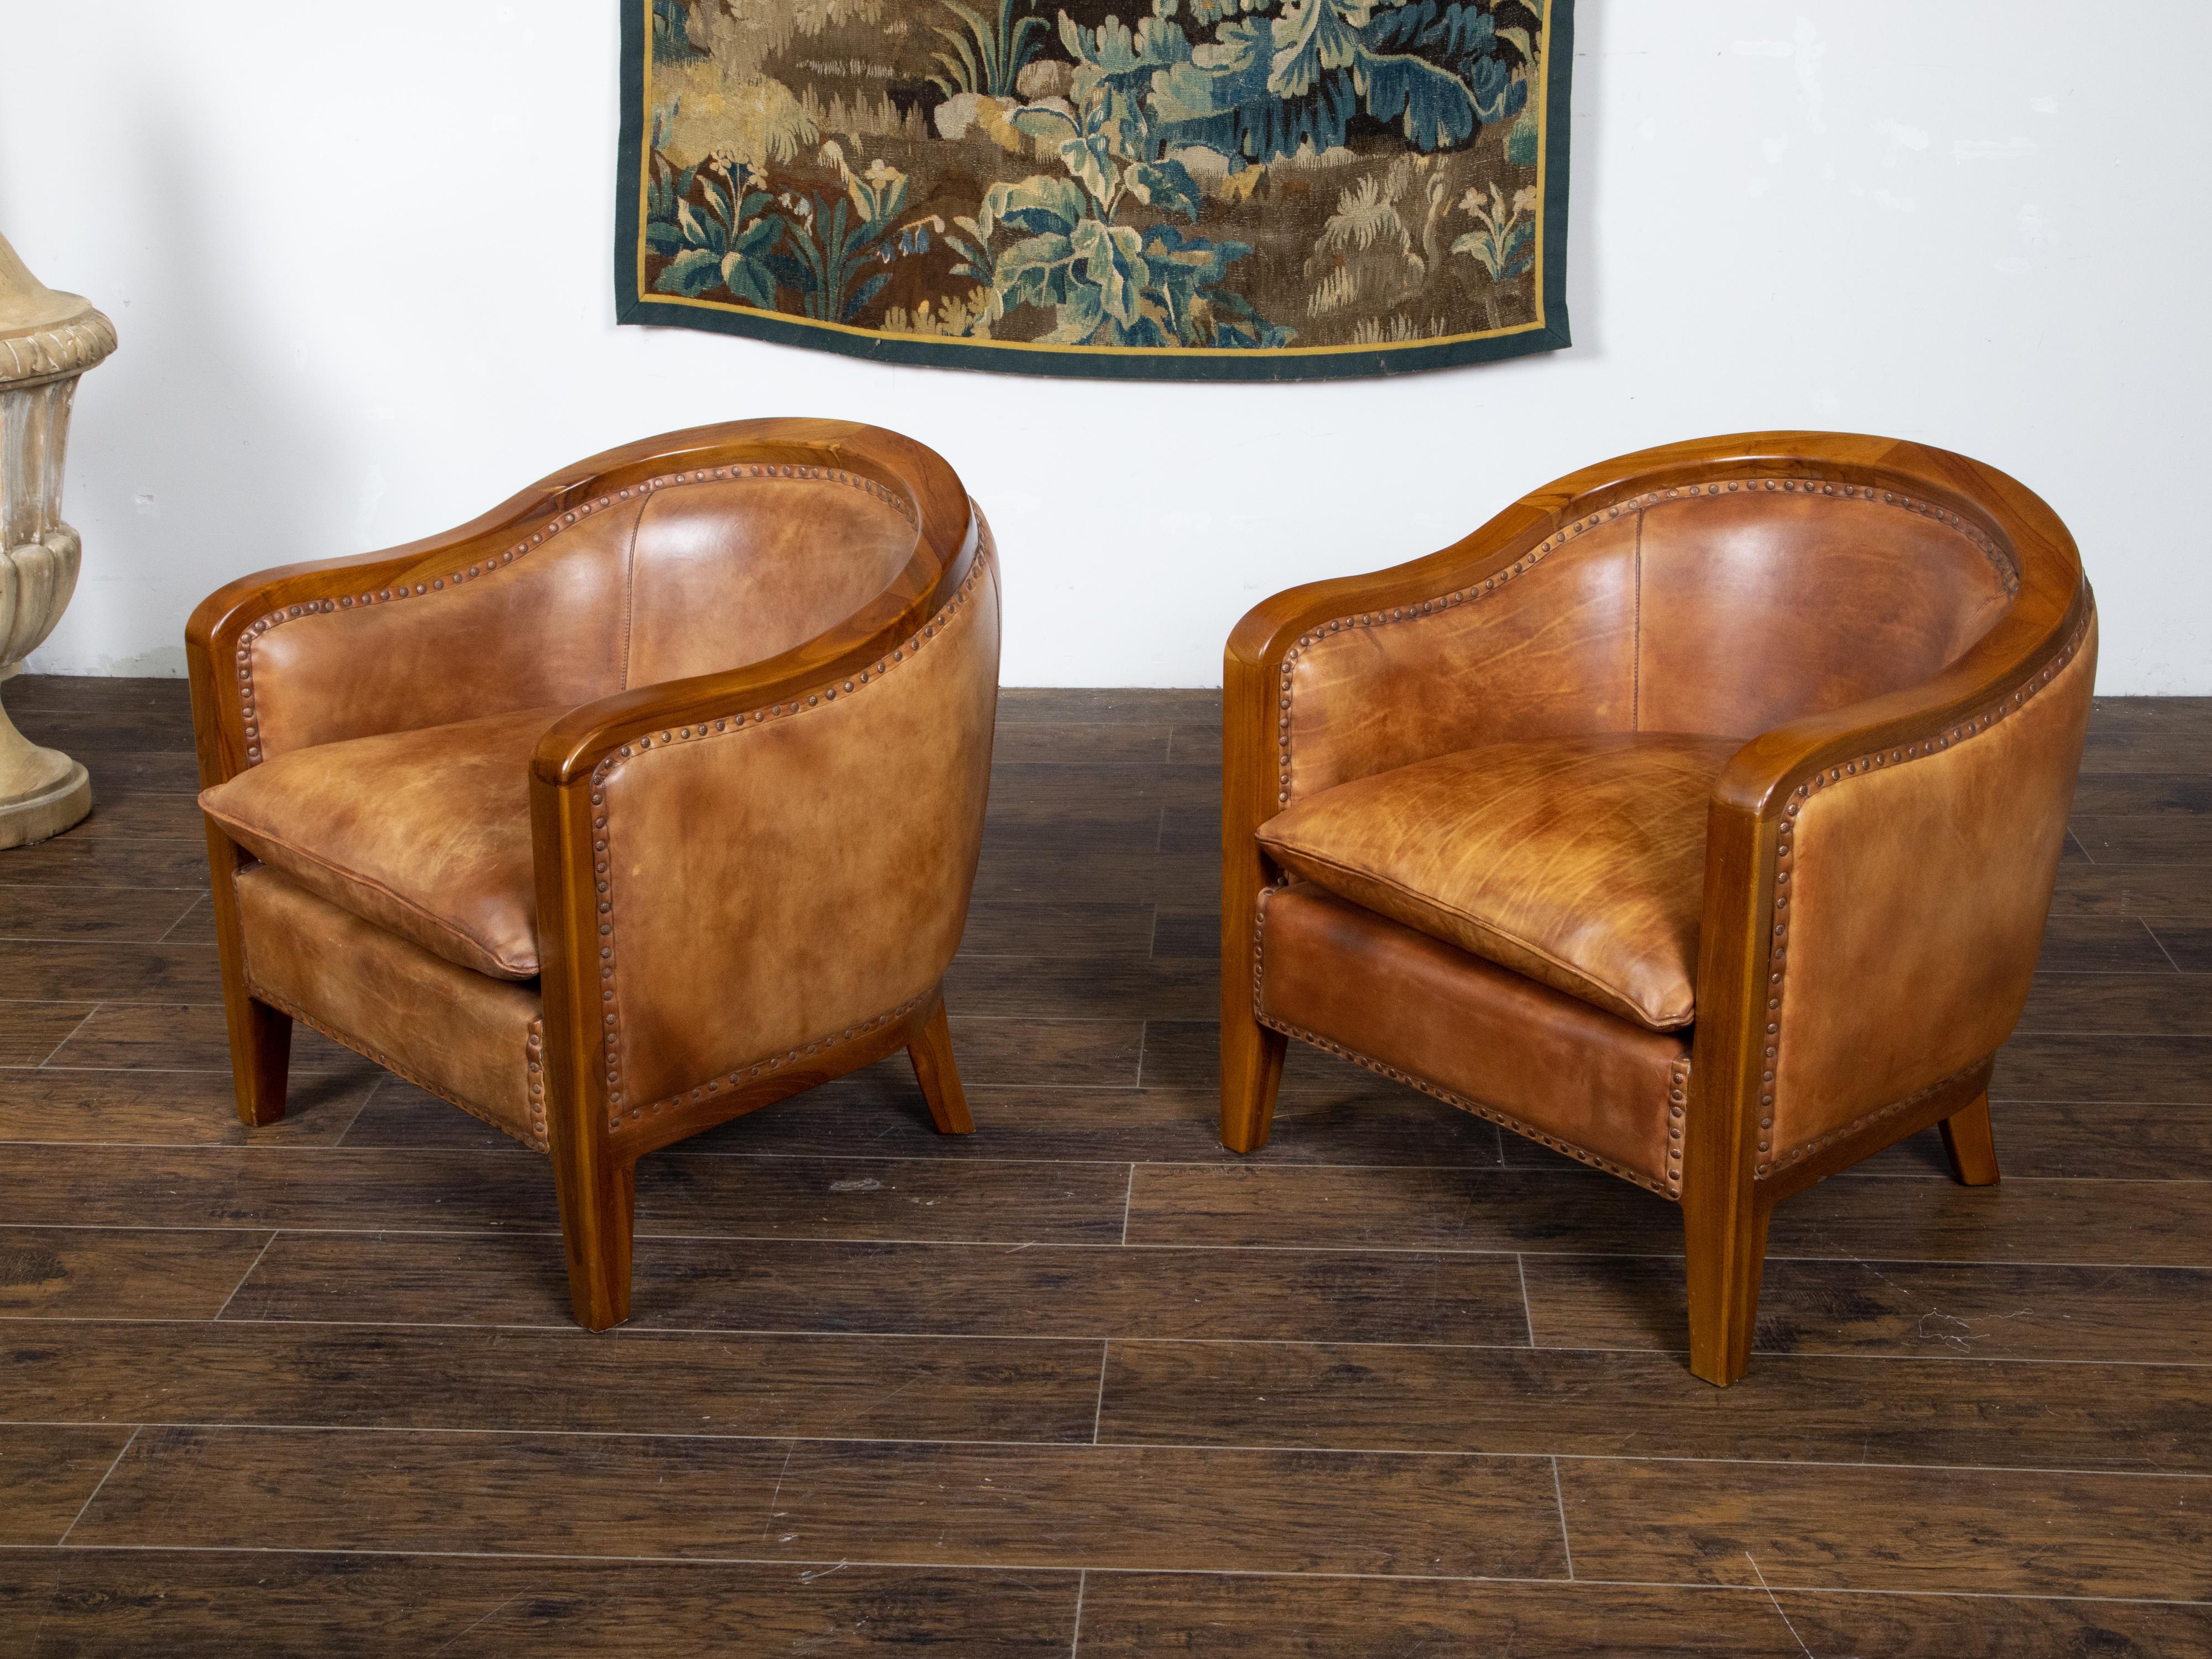 Pair of French Midcentury Brown Leather Horseshoe Club Chairs with Nailheads 1